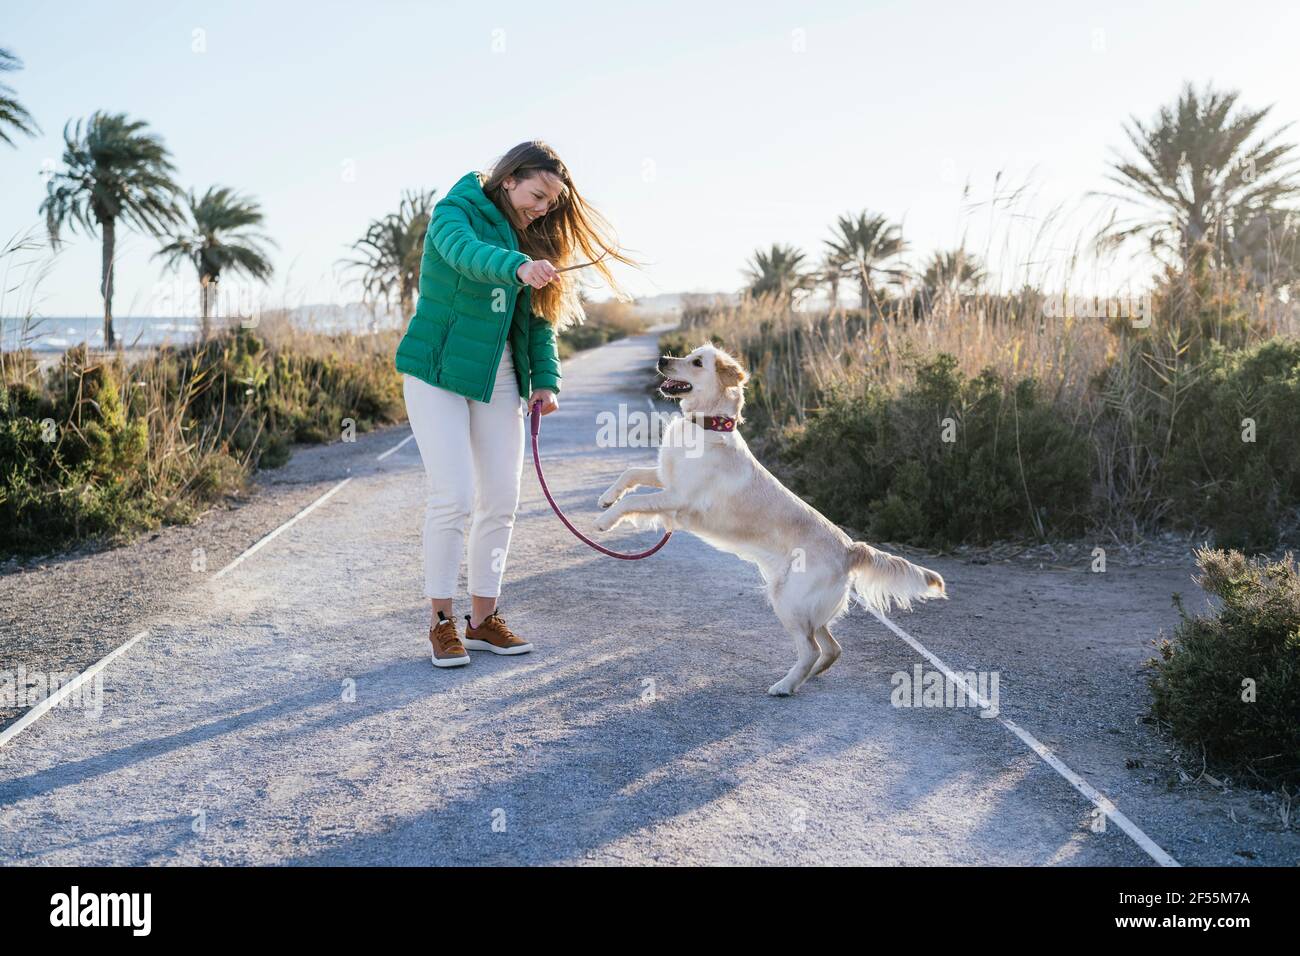 Woman giving obedience training to dog on road against sky during weekend Stock Photo